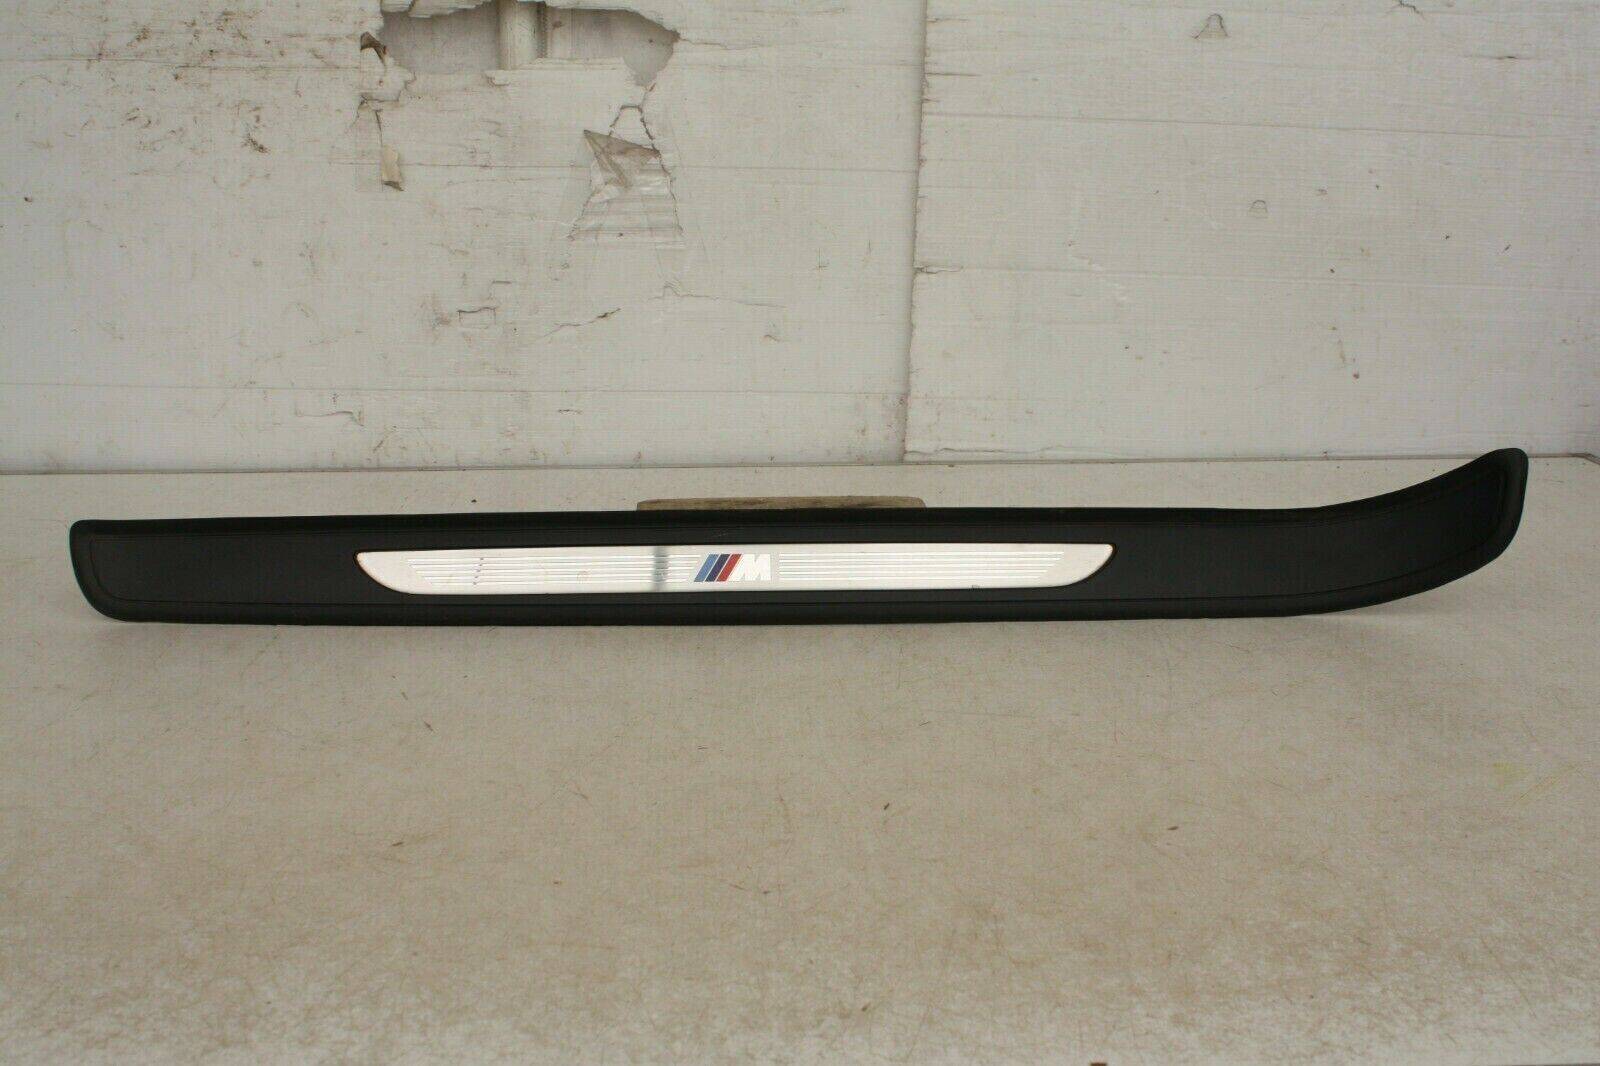 BMW 3 SERIES FRONT LEFT DOOR ENTRANCE SILL STRIP 2006 TO 2010 175431720438